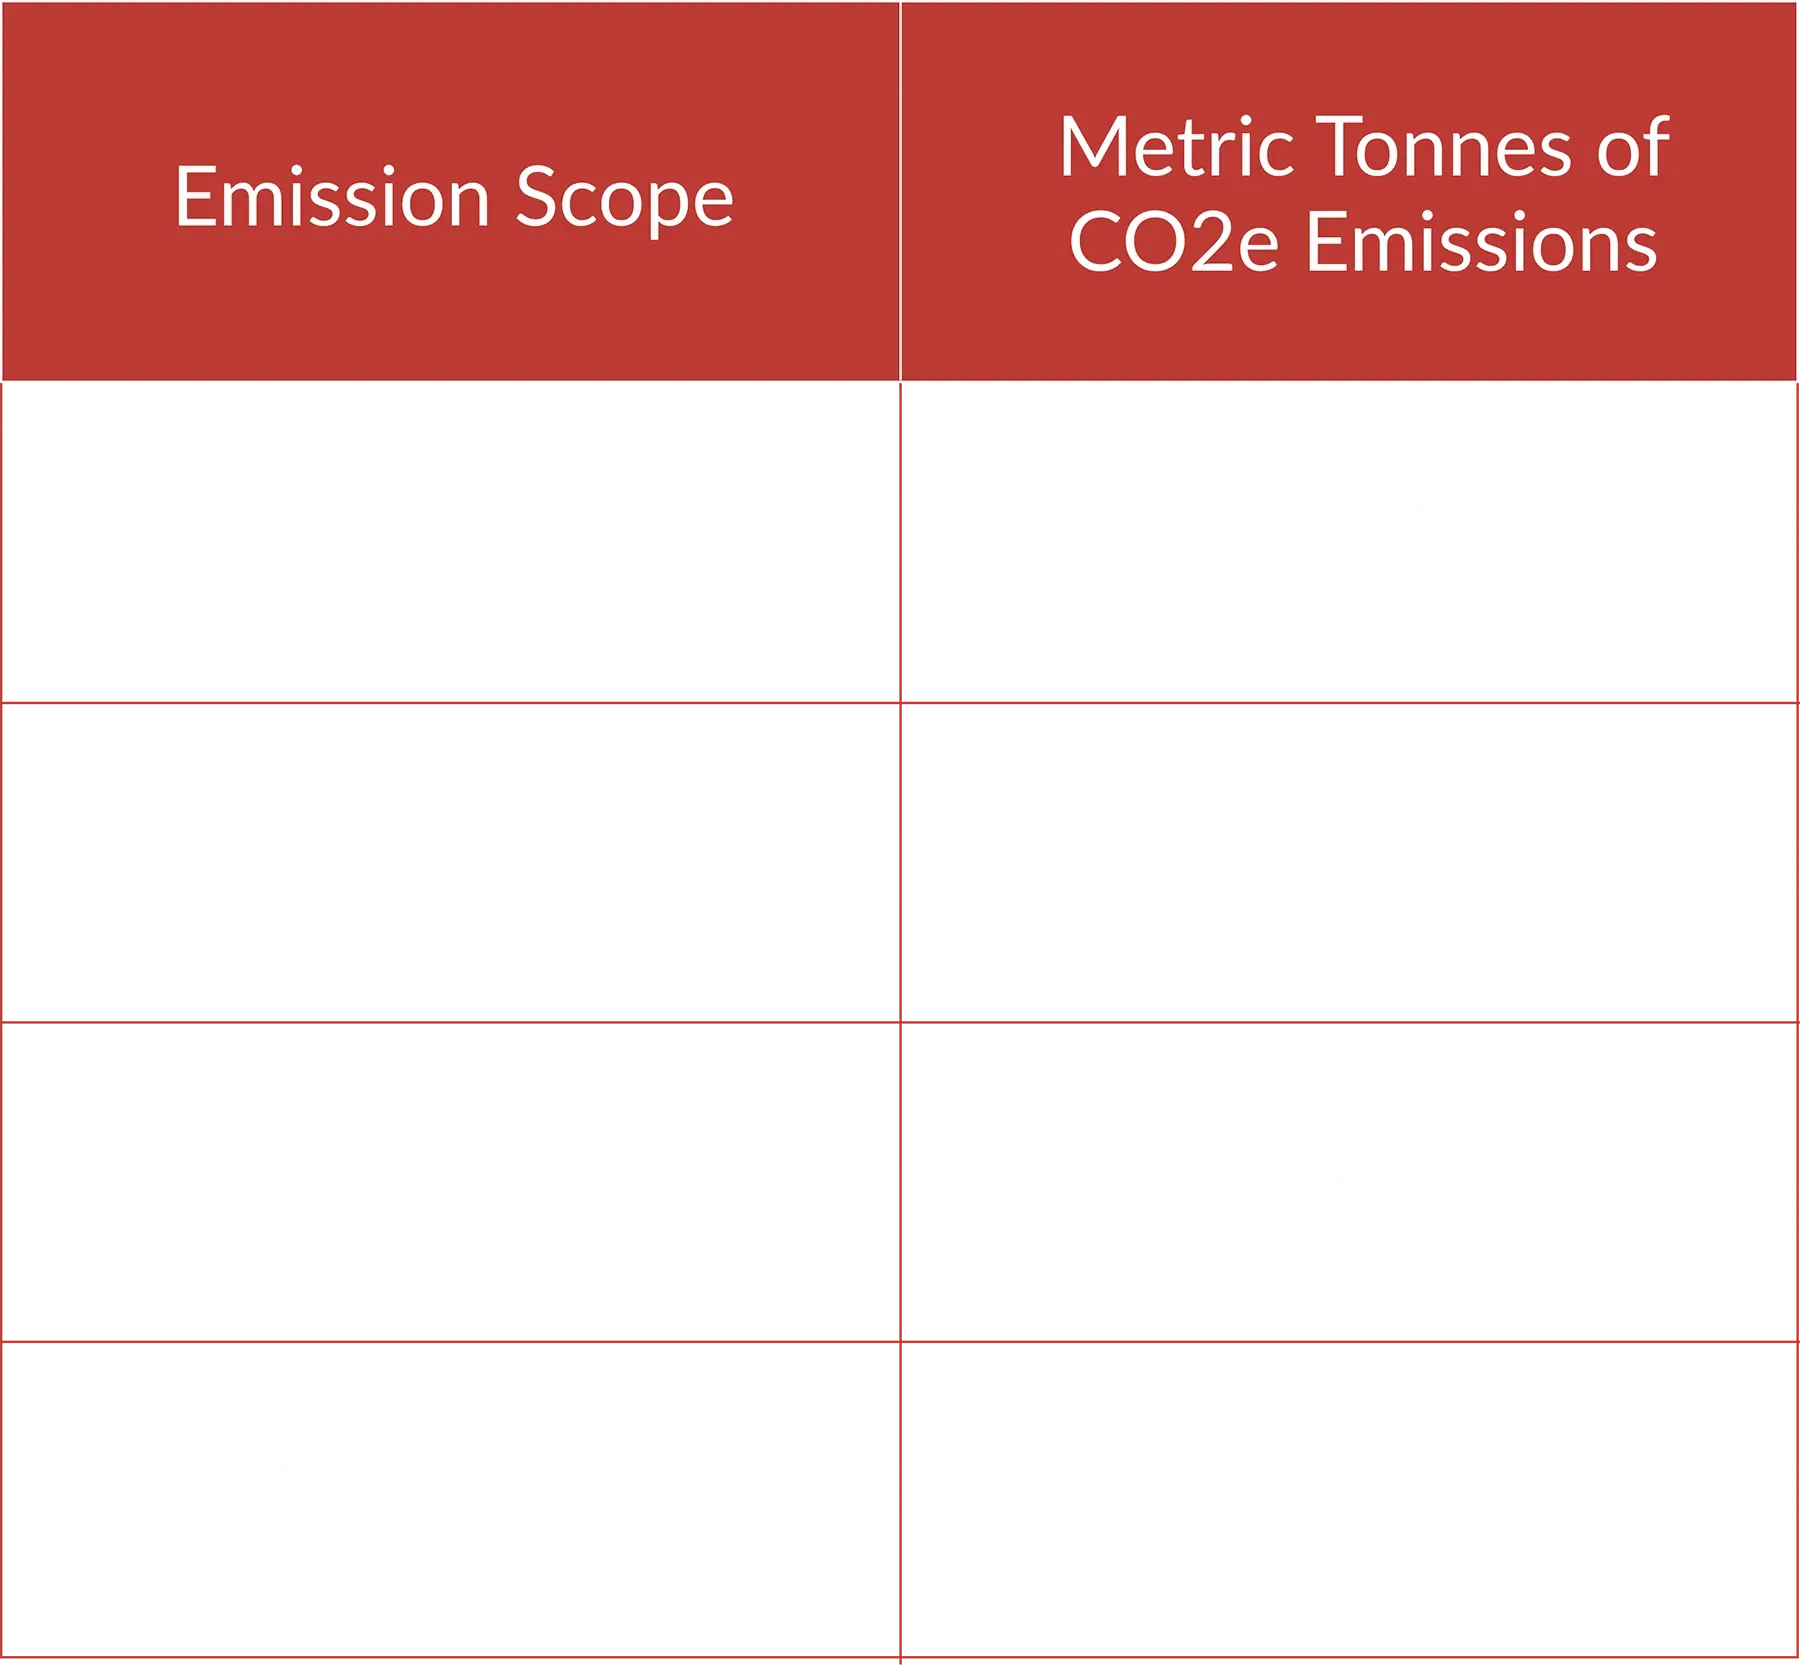 A table listing the scope 1, scope 2, and scope 3 metric tonnes of CO2e emissions generated as part of RSA’s 2022 operations.